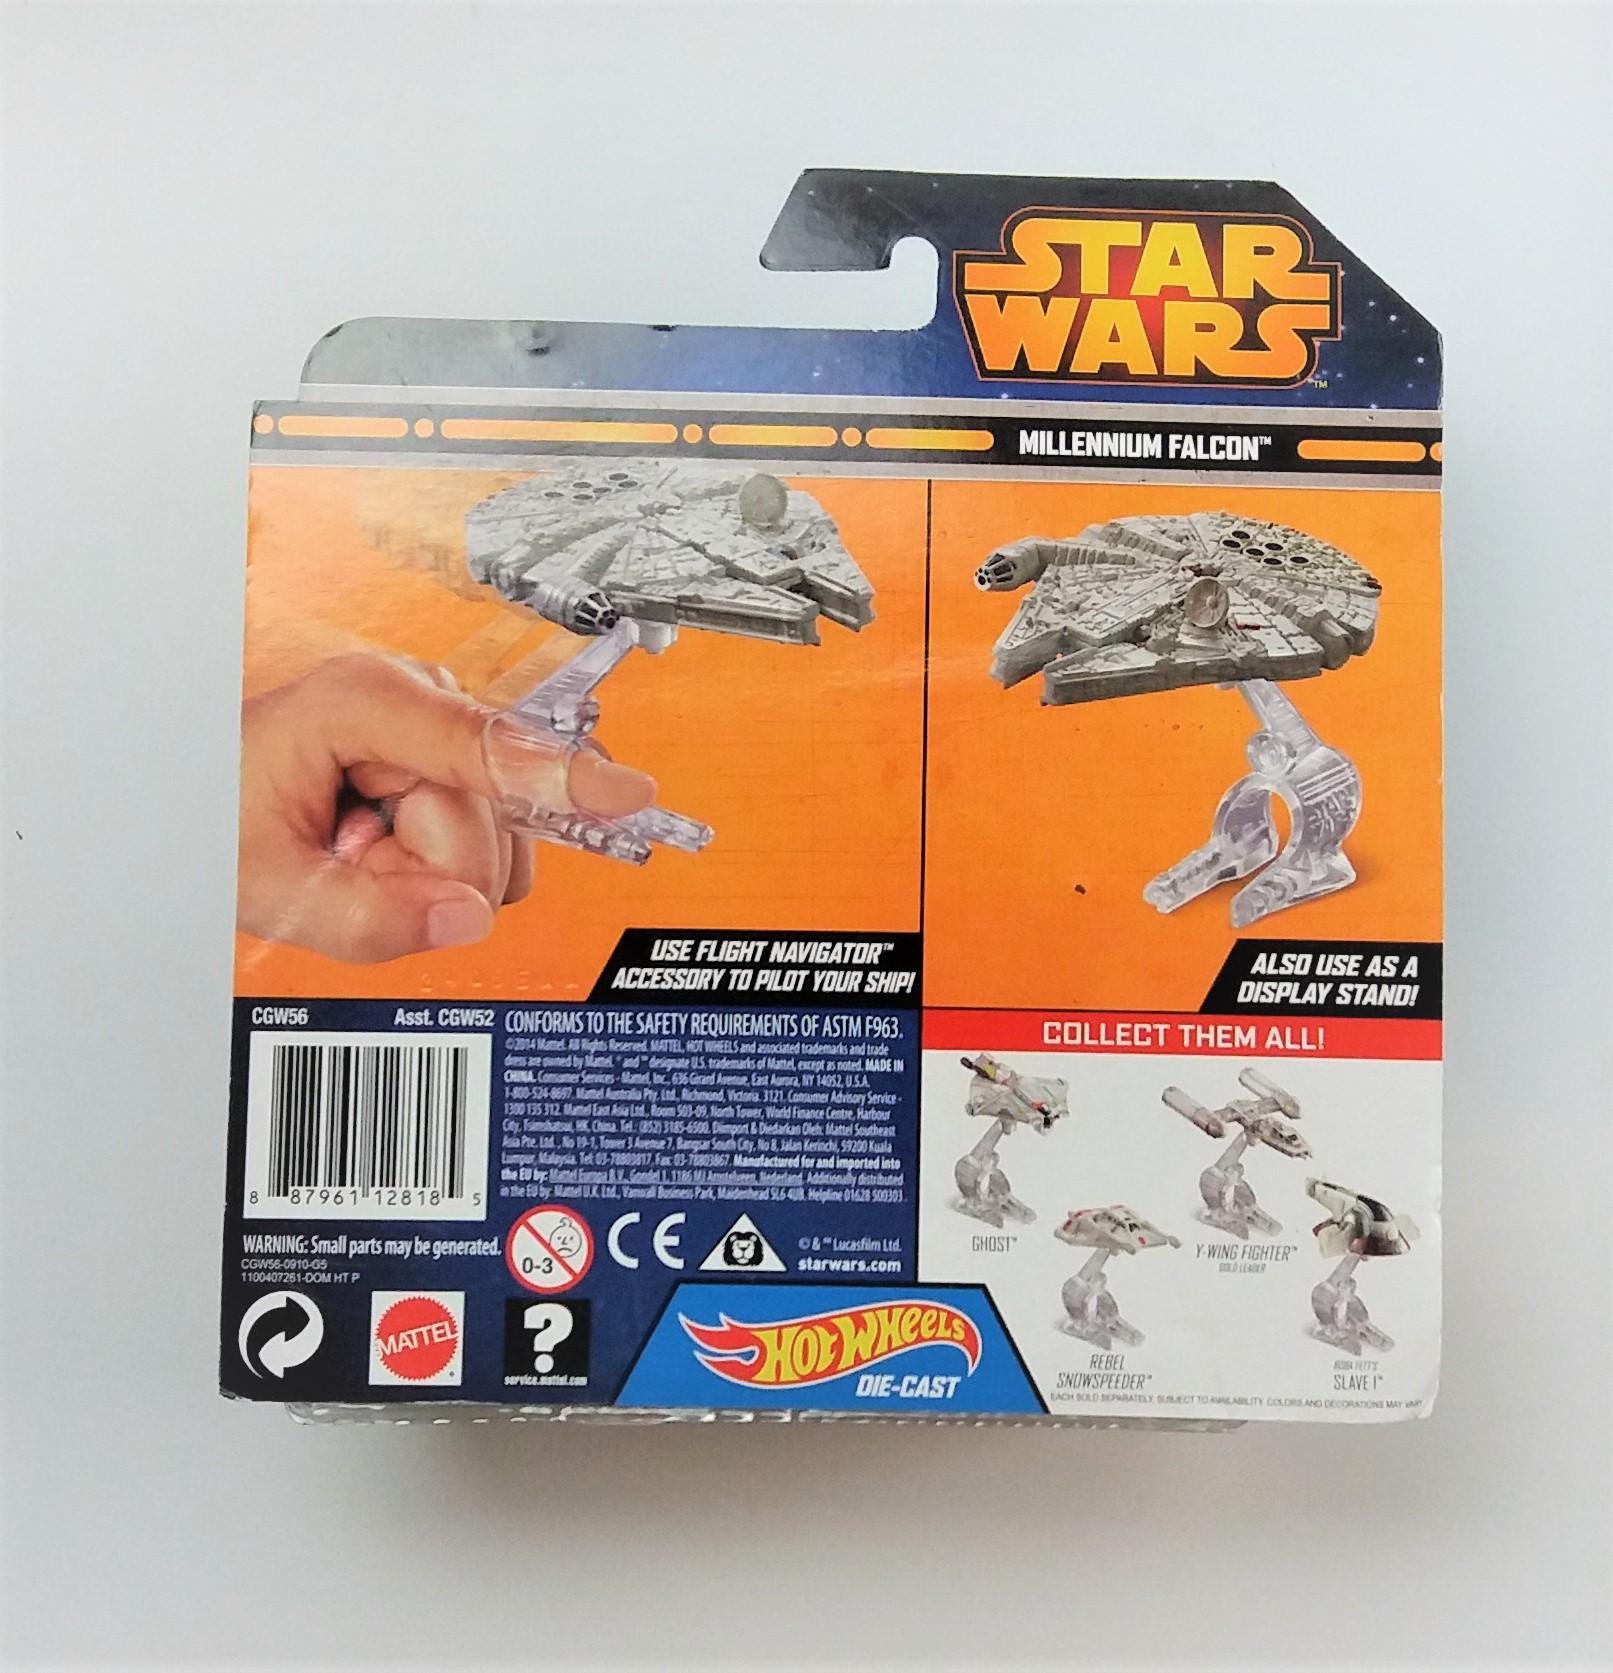 Millennium Falcon Hot Wheels Star Wars Starships Die Cast Collectible Figure w/Stand